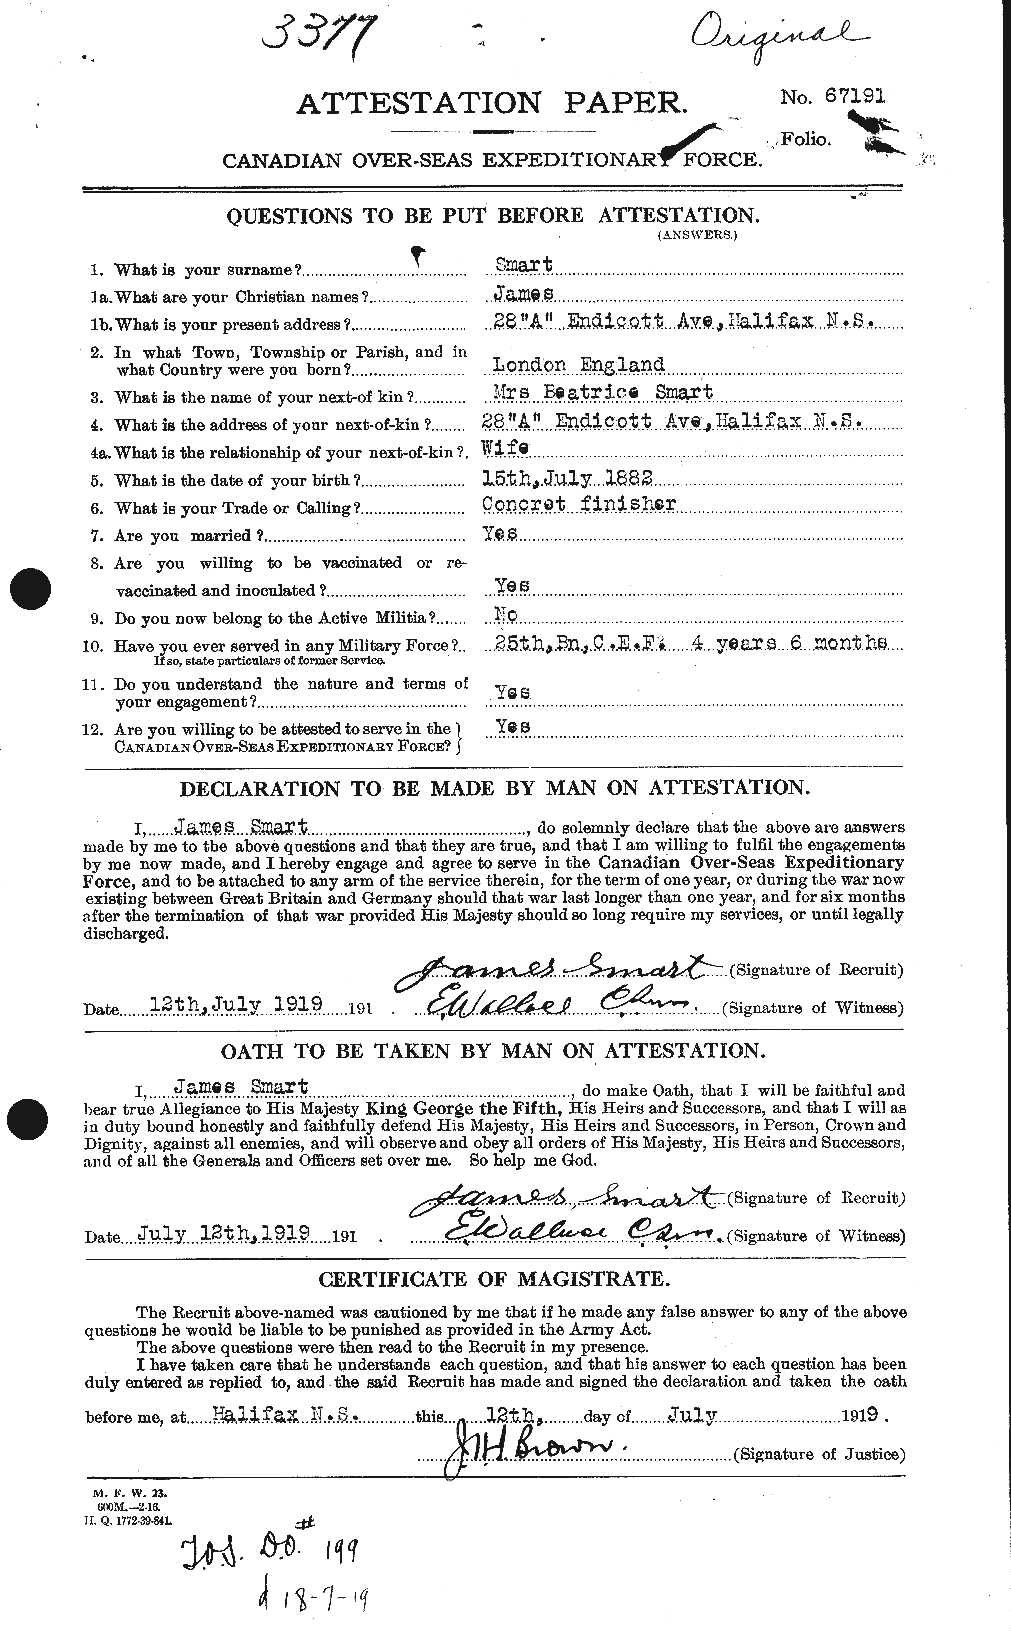 Personnel Records of the First World War - CEF 102851a